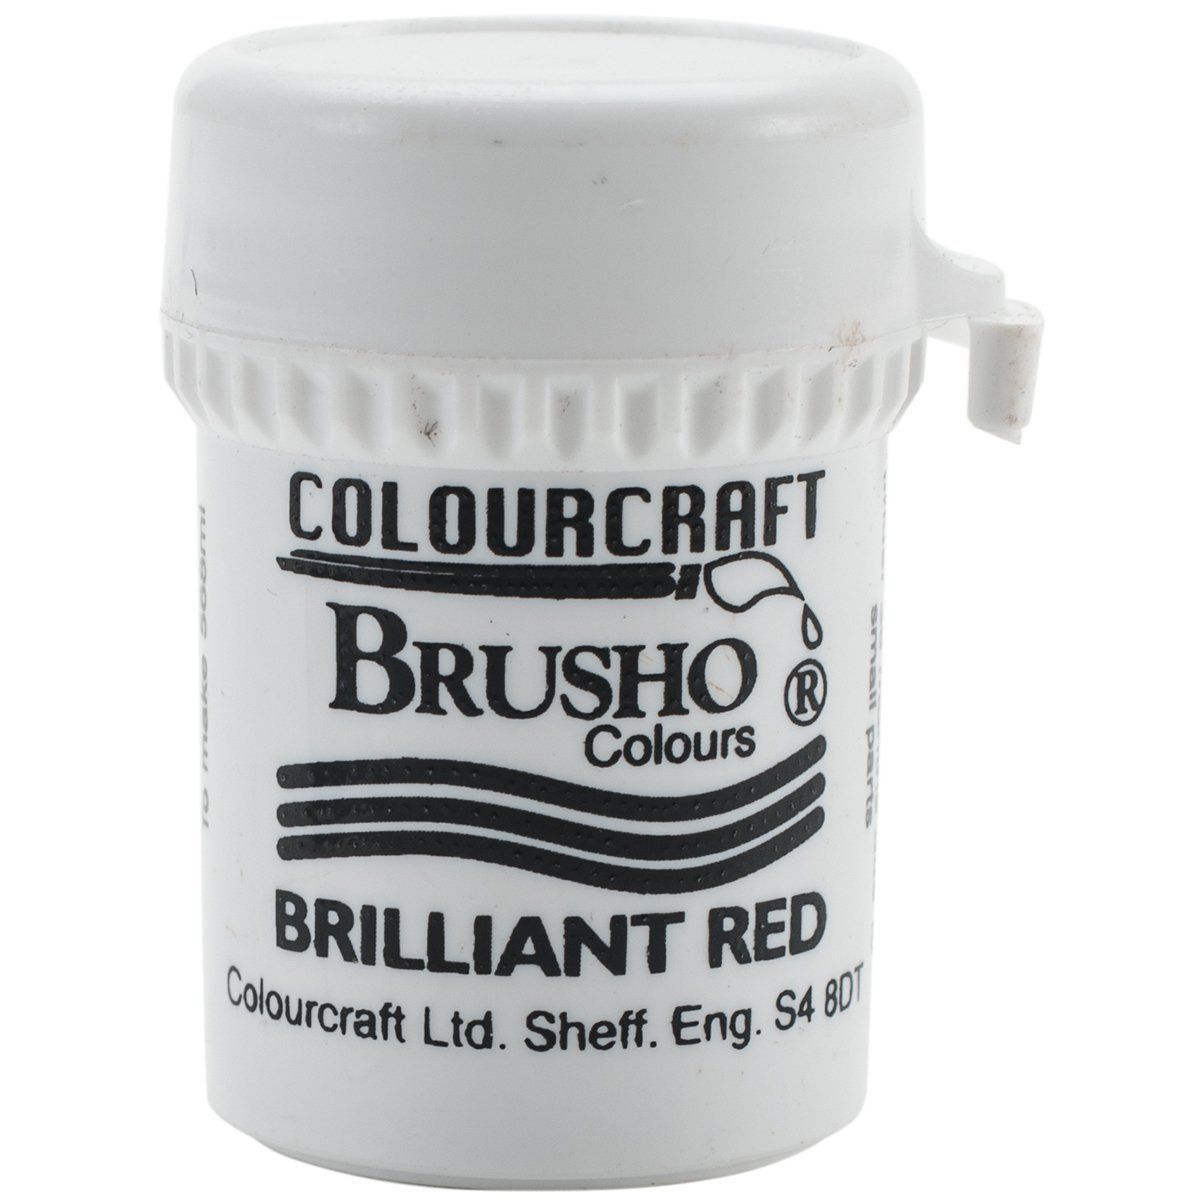 Brusho Crystal Colour - Brilliant Red 15 gm